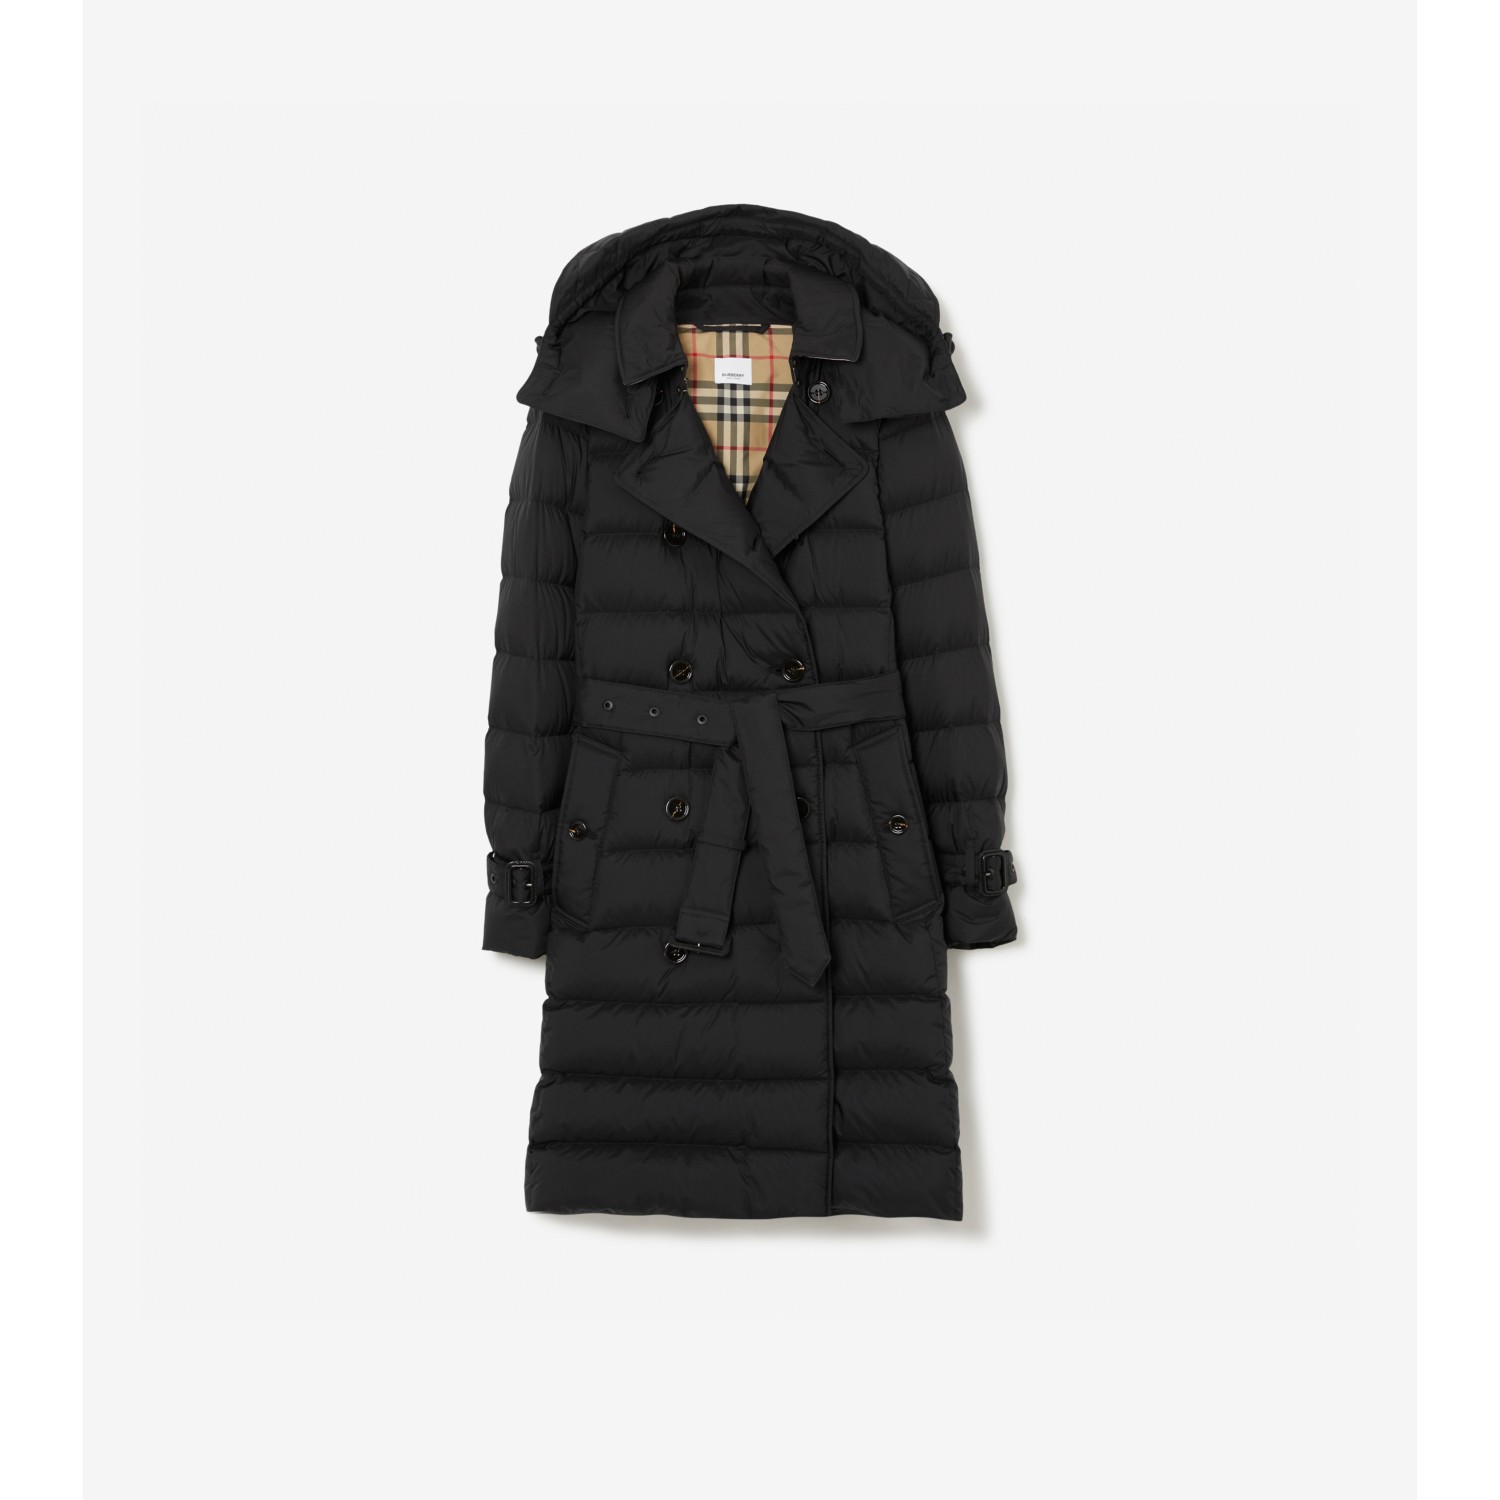 Unlock Wilderness' choice in the Burberry Vs Canada Goose comparison, the Nylon Puffer Coat by Burberry